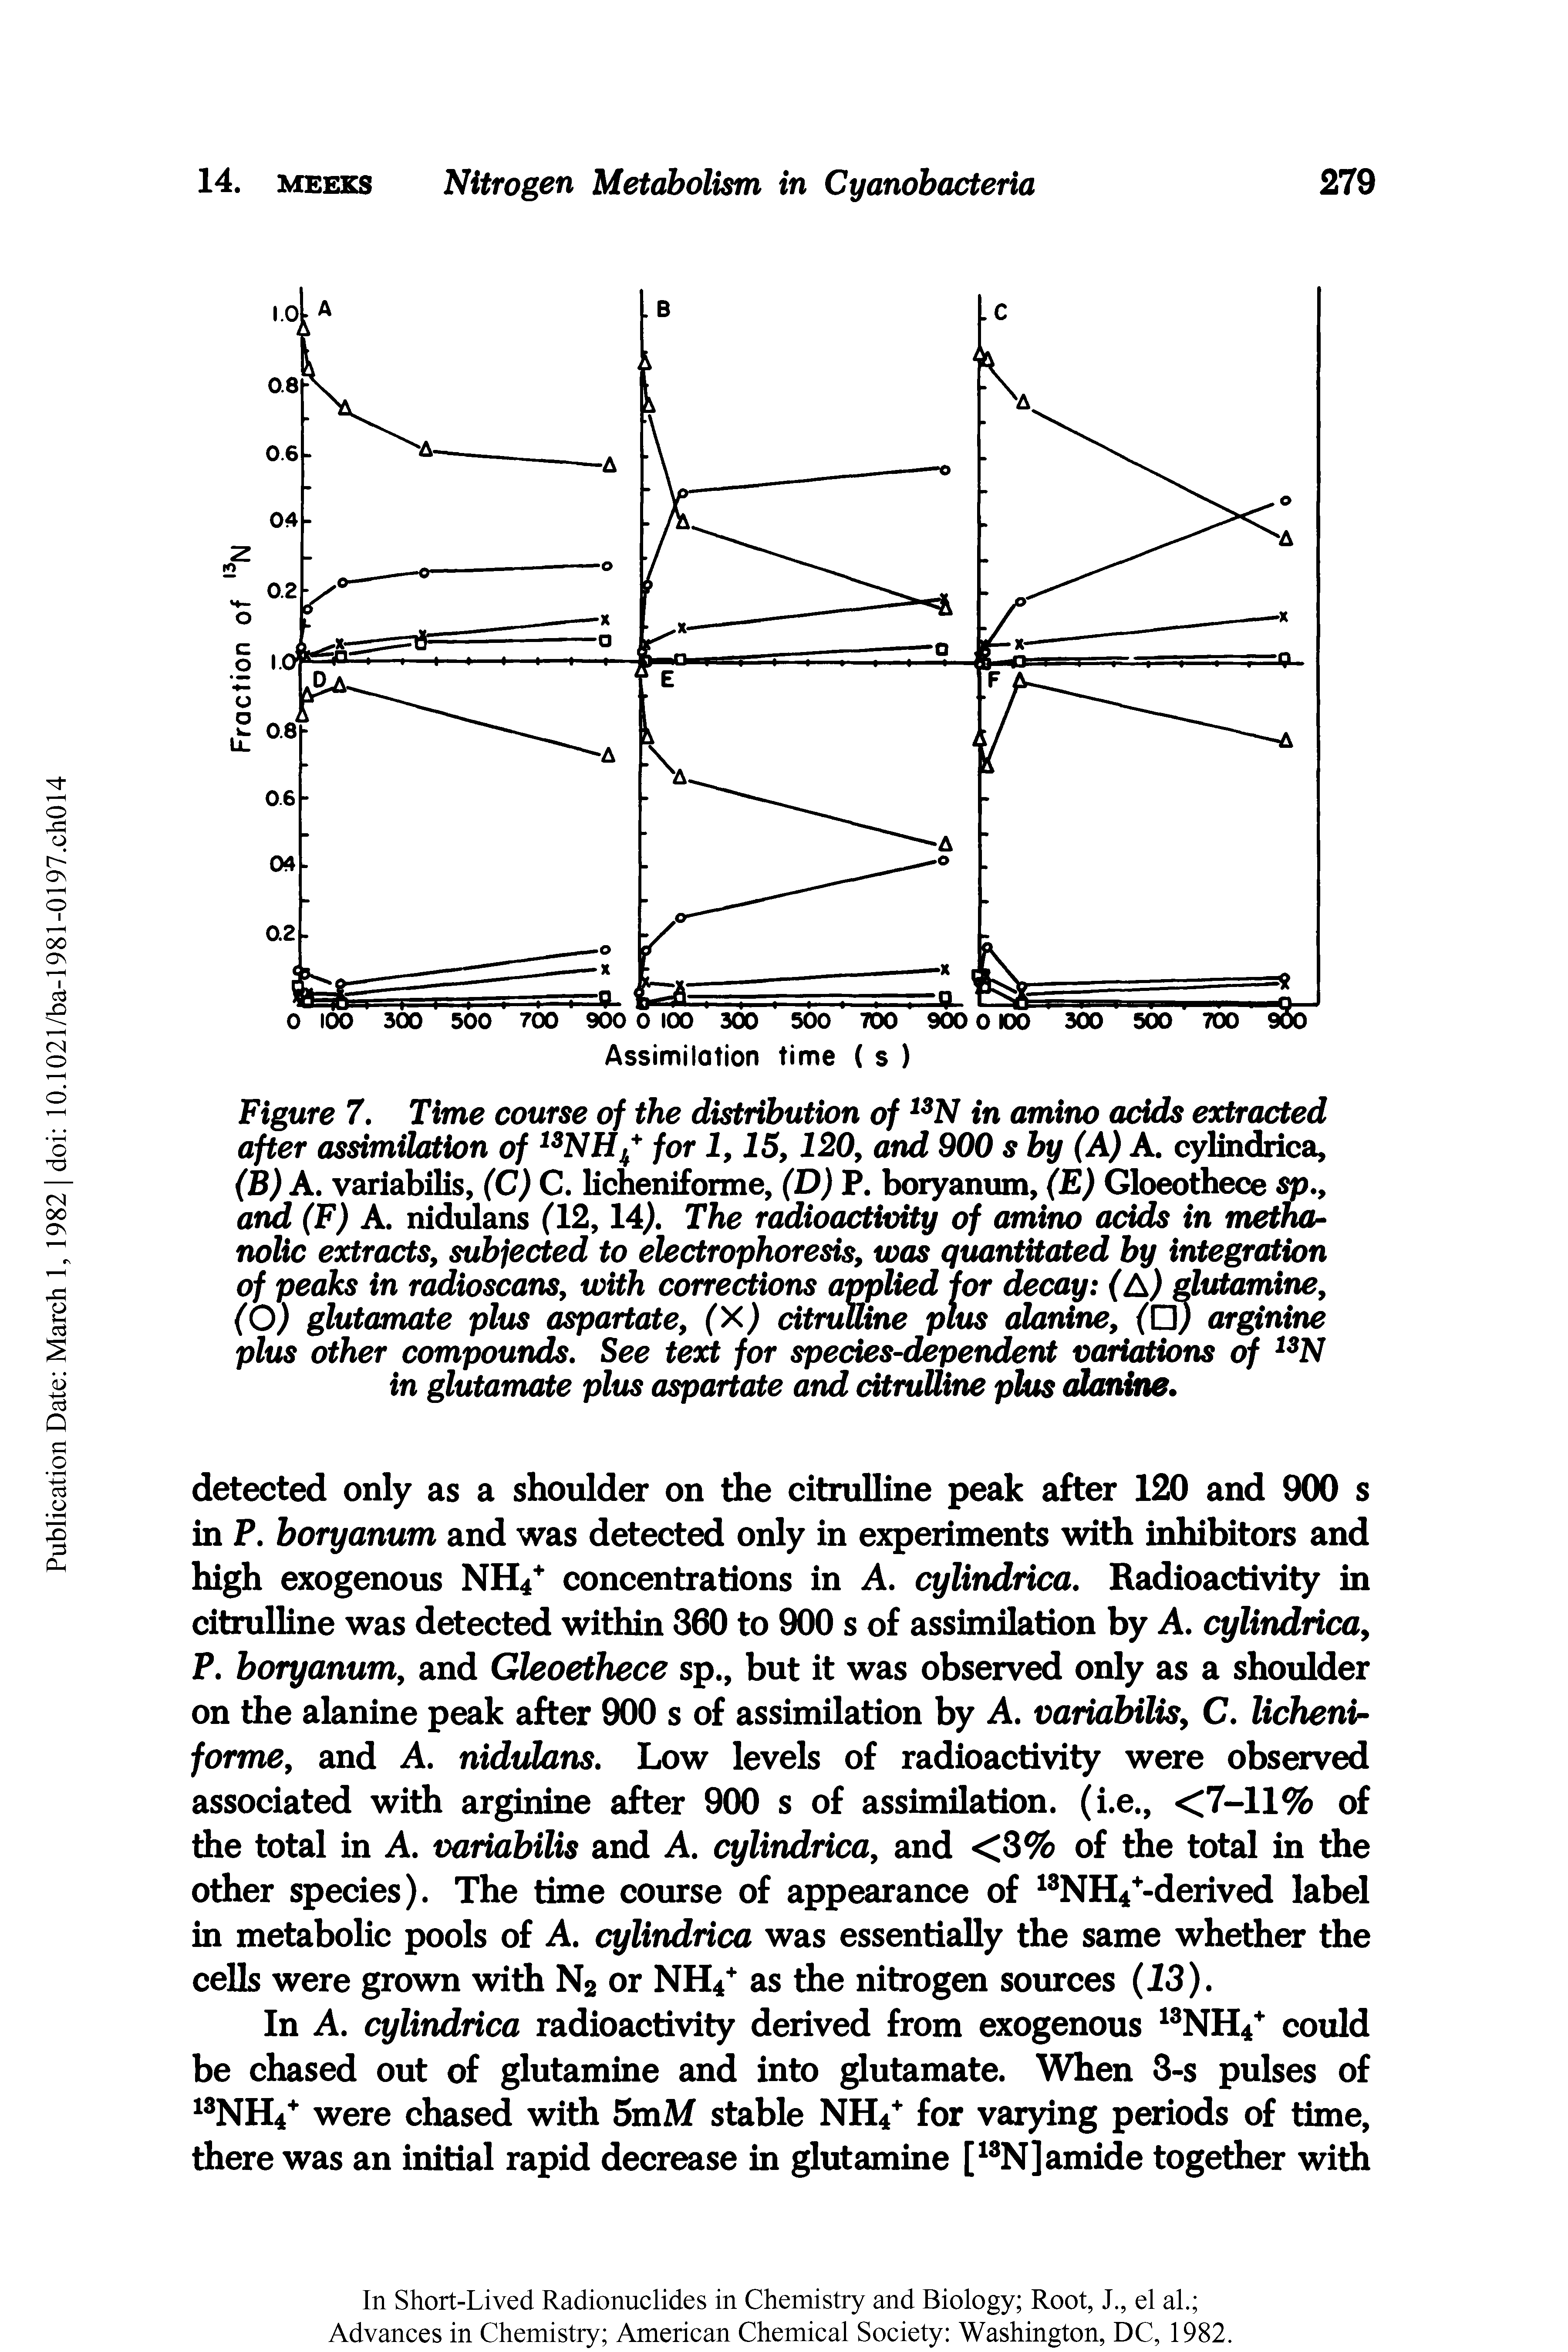 Figure 7. Time course of the distribution of in amino acids extracted after assimilation of for 1,15,120, and 900 s by (A) A. cylindrica,...